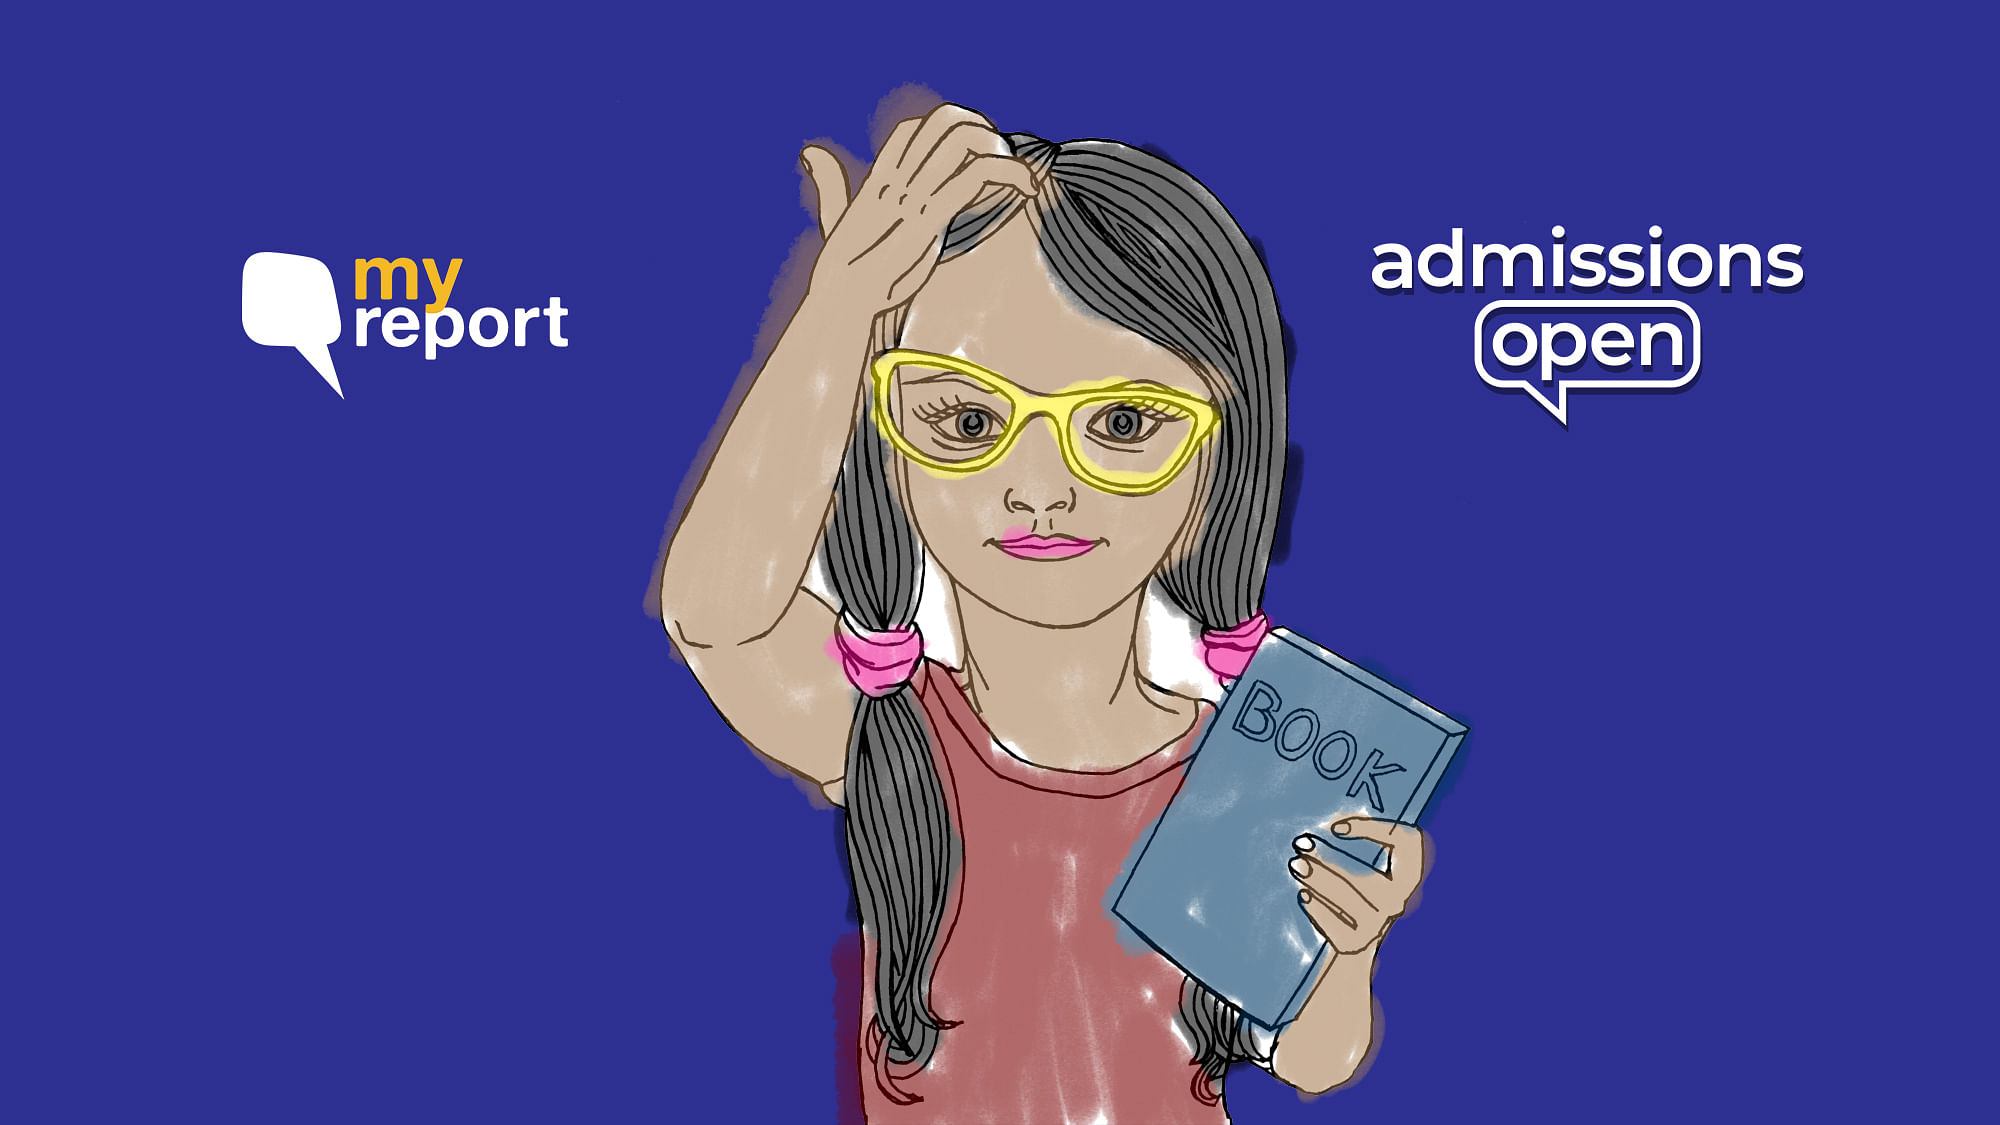 The Quint along with CollegeDekho will answer all your admissions queries. All you need to do is send your questions to eduqueries@thequint.com.